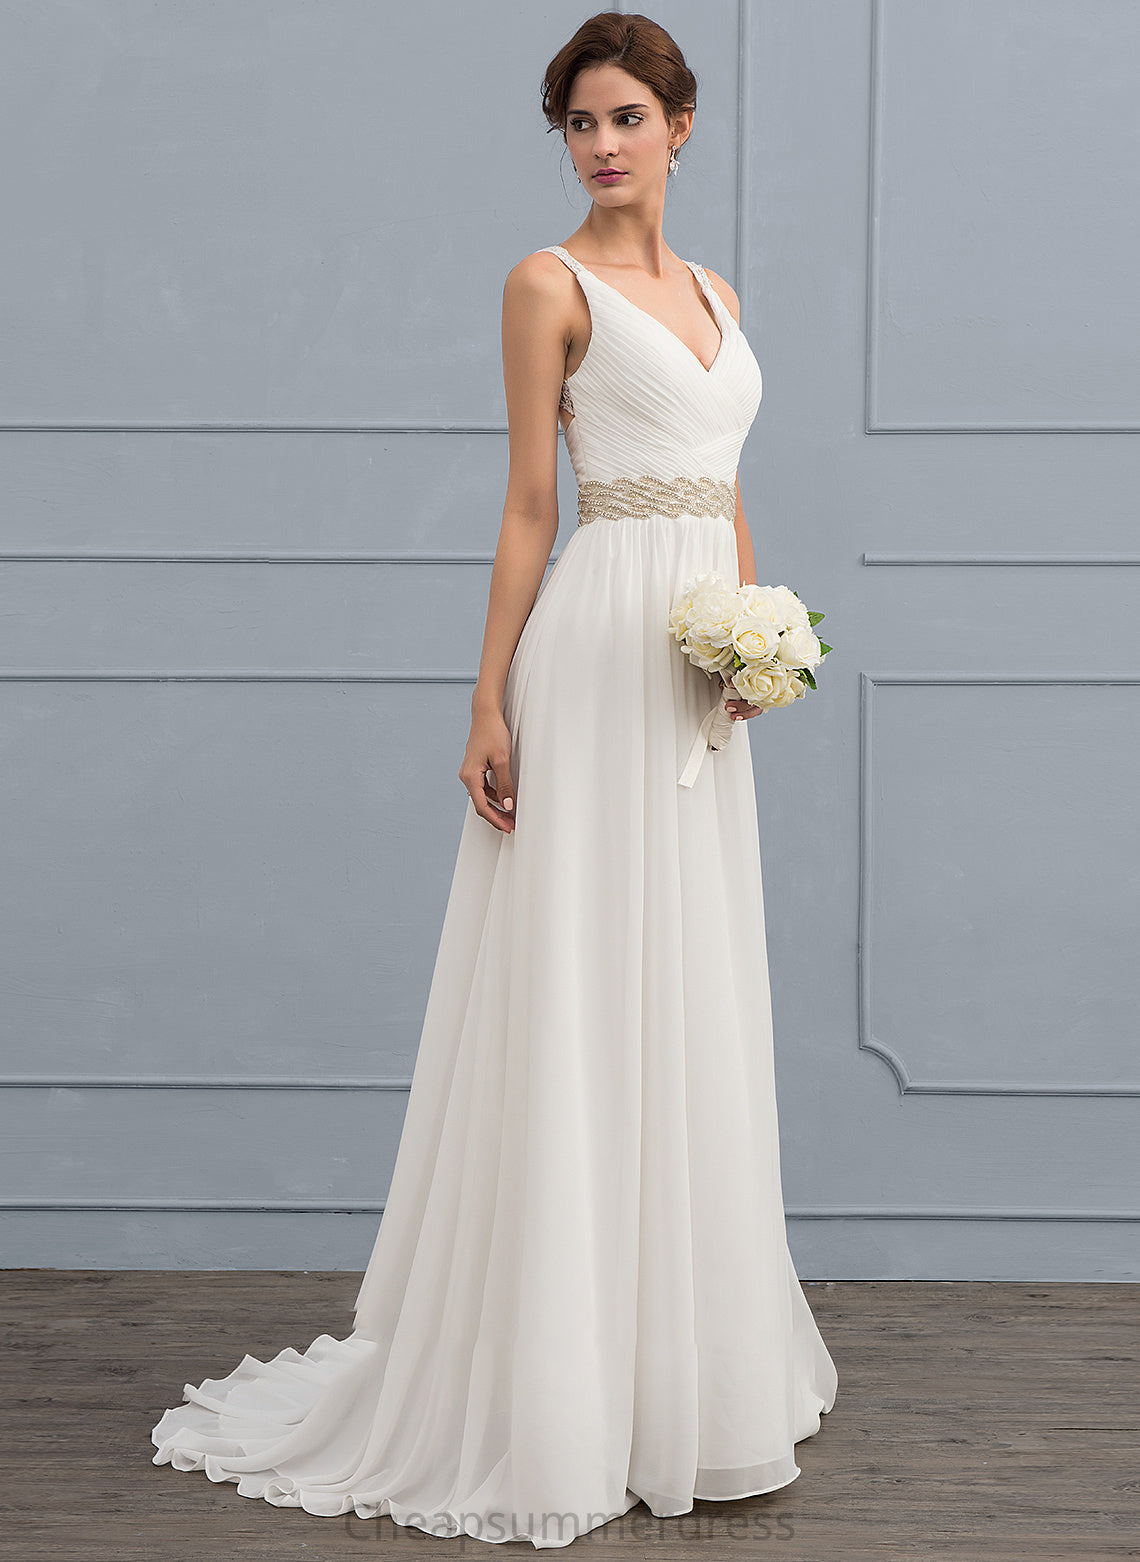 Dress Chiffon Meadow V-neck Sweep Ruffle Sequins Beading Wedding Dresses Wedding Train Lace With A-Line